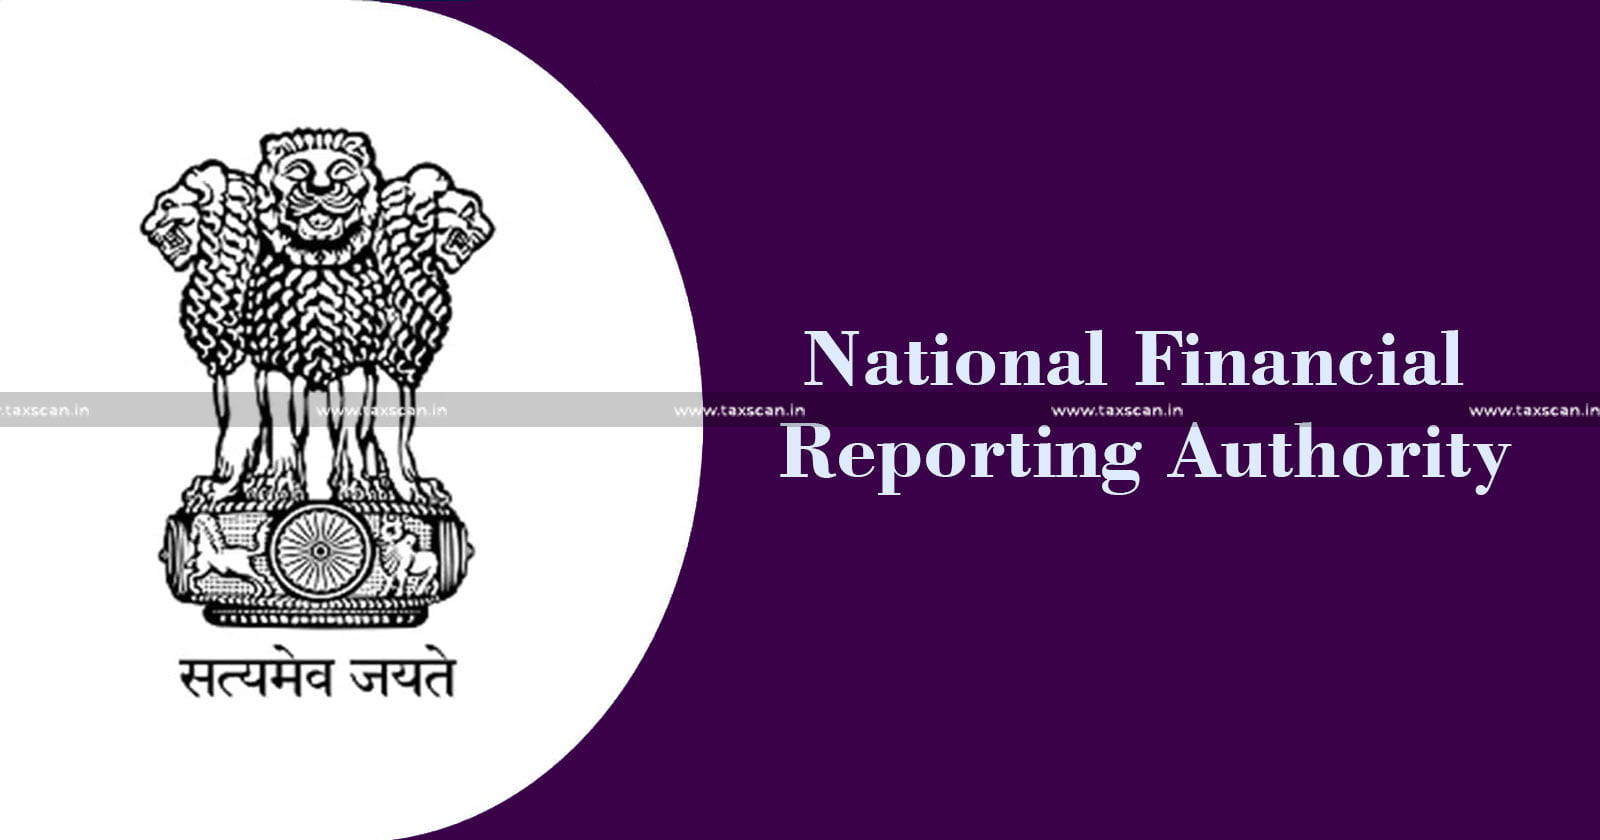 CA - Fails to report - Non-Compliance with Format of Financial Statements - Non-compliance - Professional Misconduct - NFRA - Penalty - Taxscan